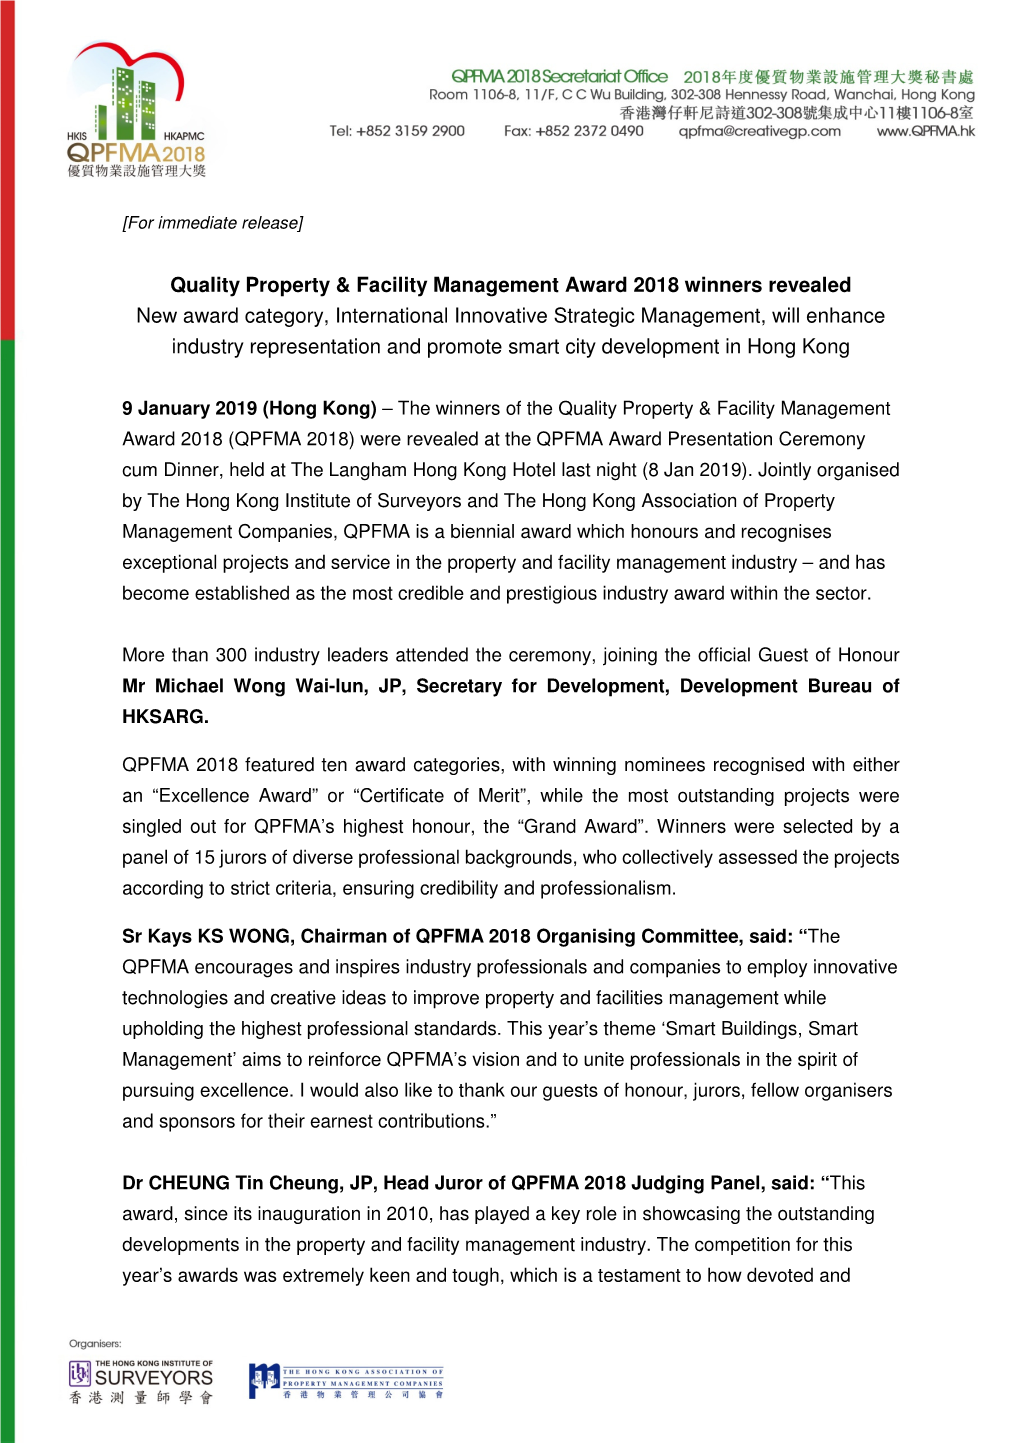 Quality Property & Facility Management Award 2018 Winners